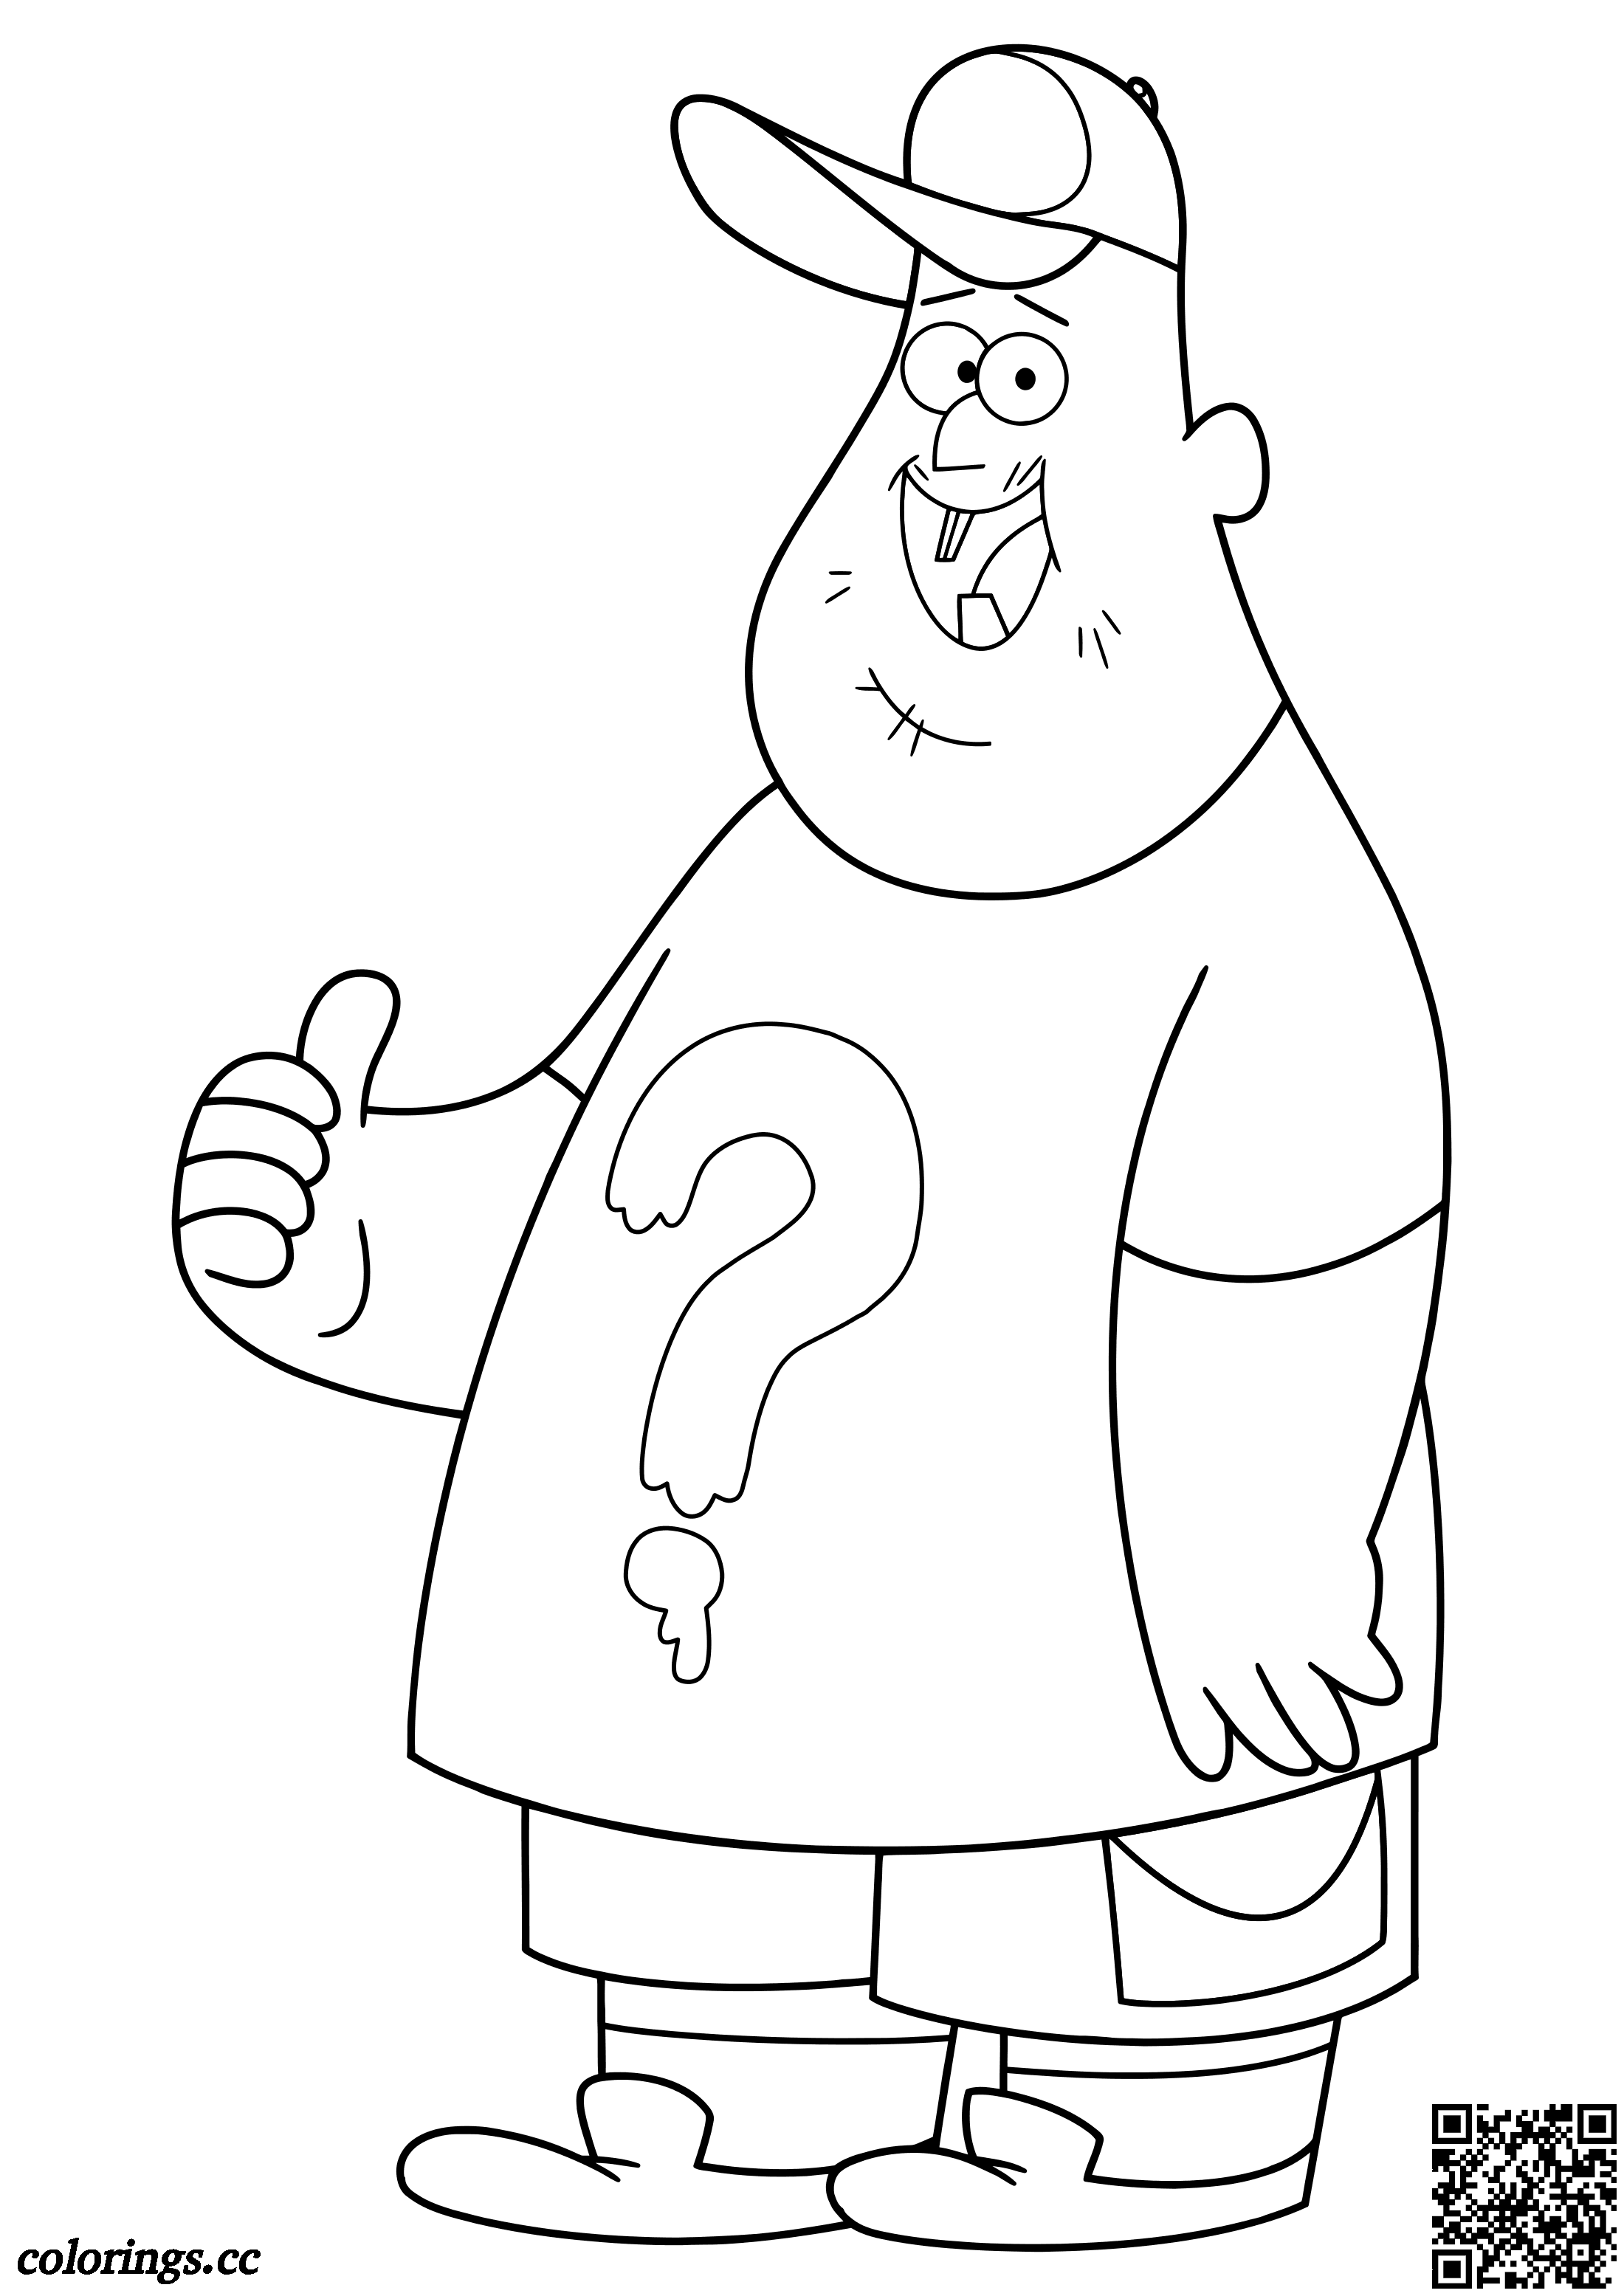 Soos Ramirez coloring pages, Gravity Falls coloring pages - Colorings.cc